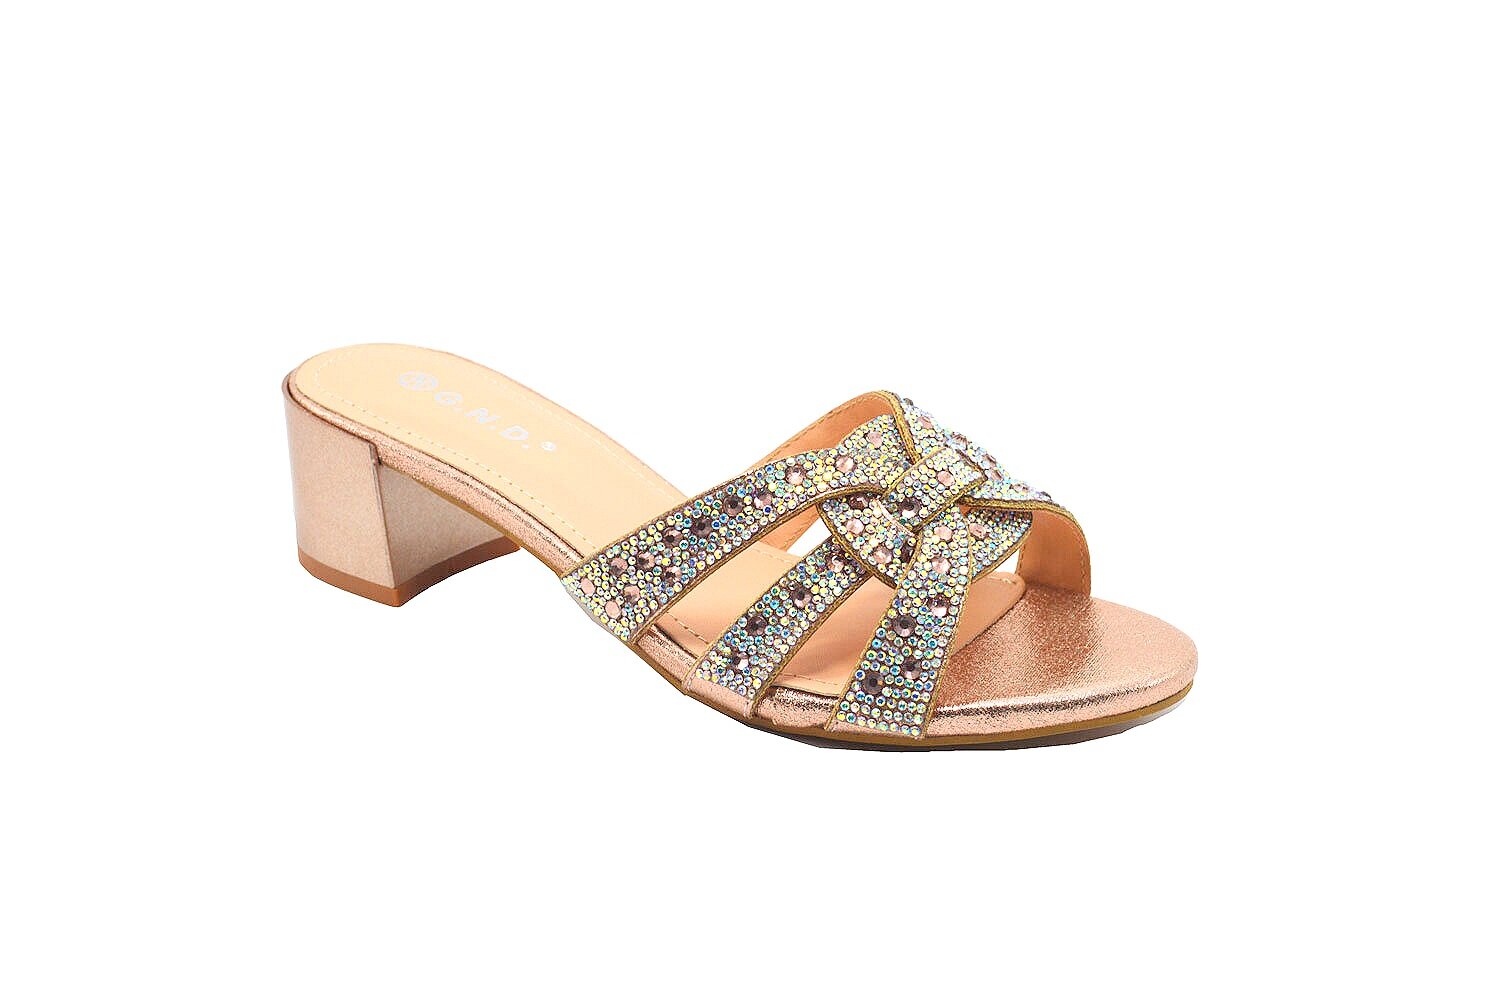 Wholesale Women's Sandals Heeled Glitter Ladies Party Harlow NGj2